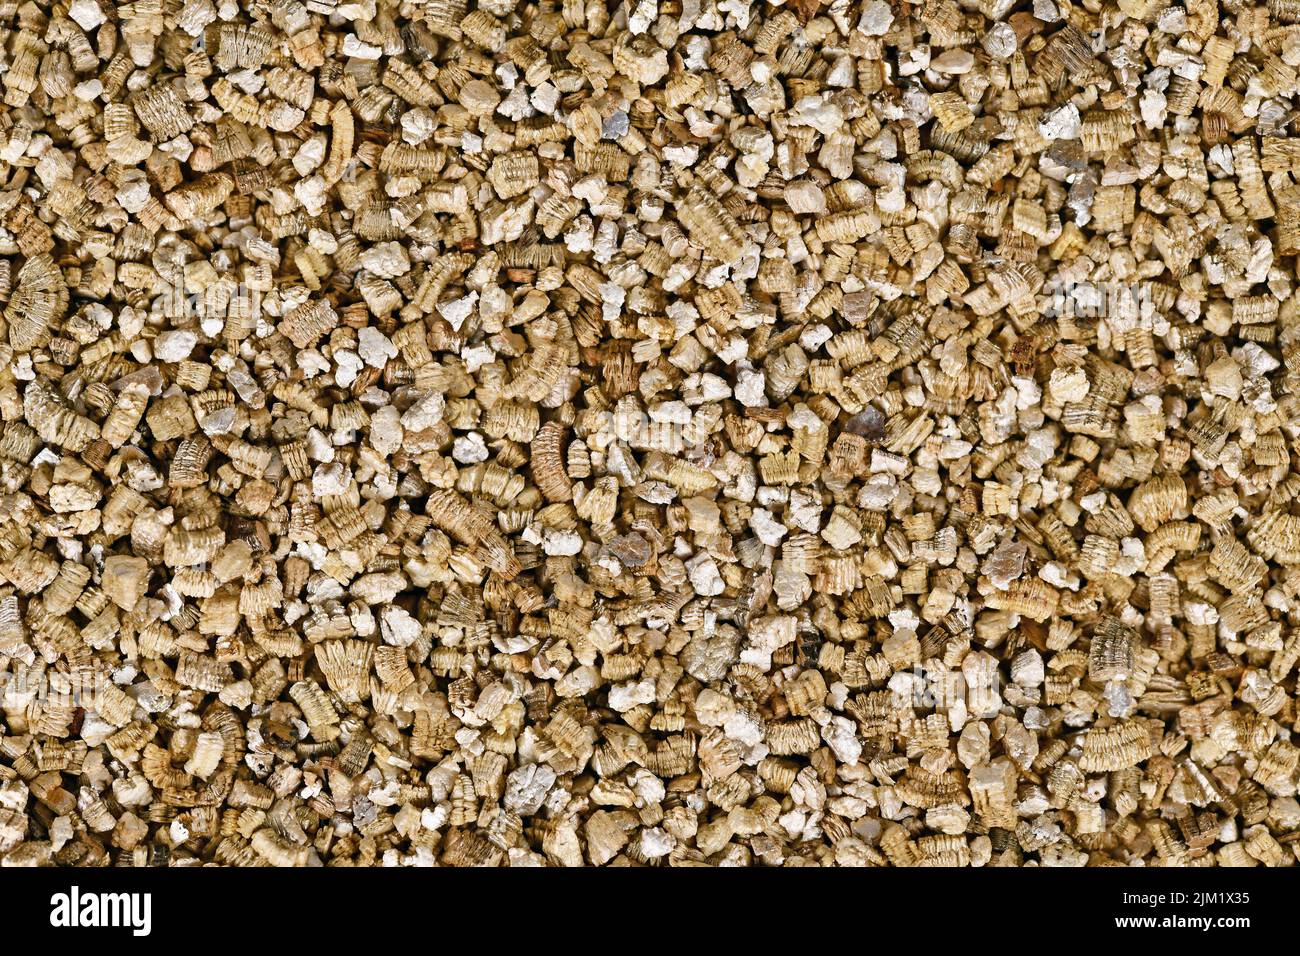 Close up of exfoliated vermiculite, a hydrous mineral used as soilless growing medium for plants Stock Photo